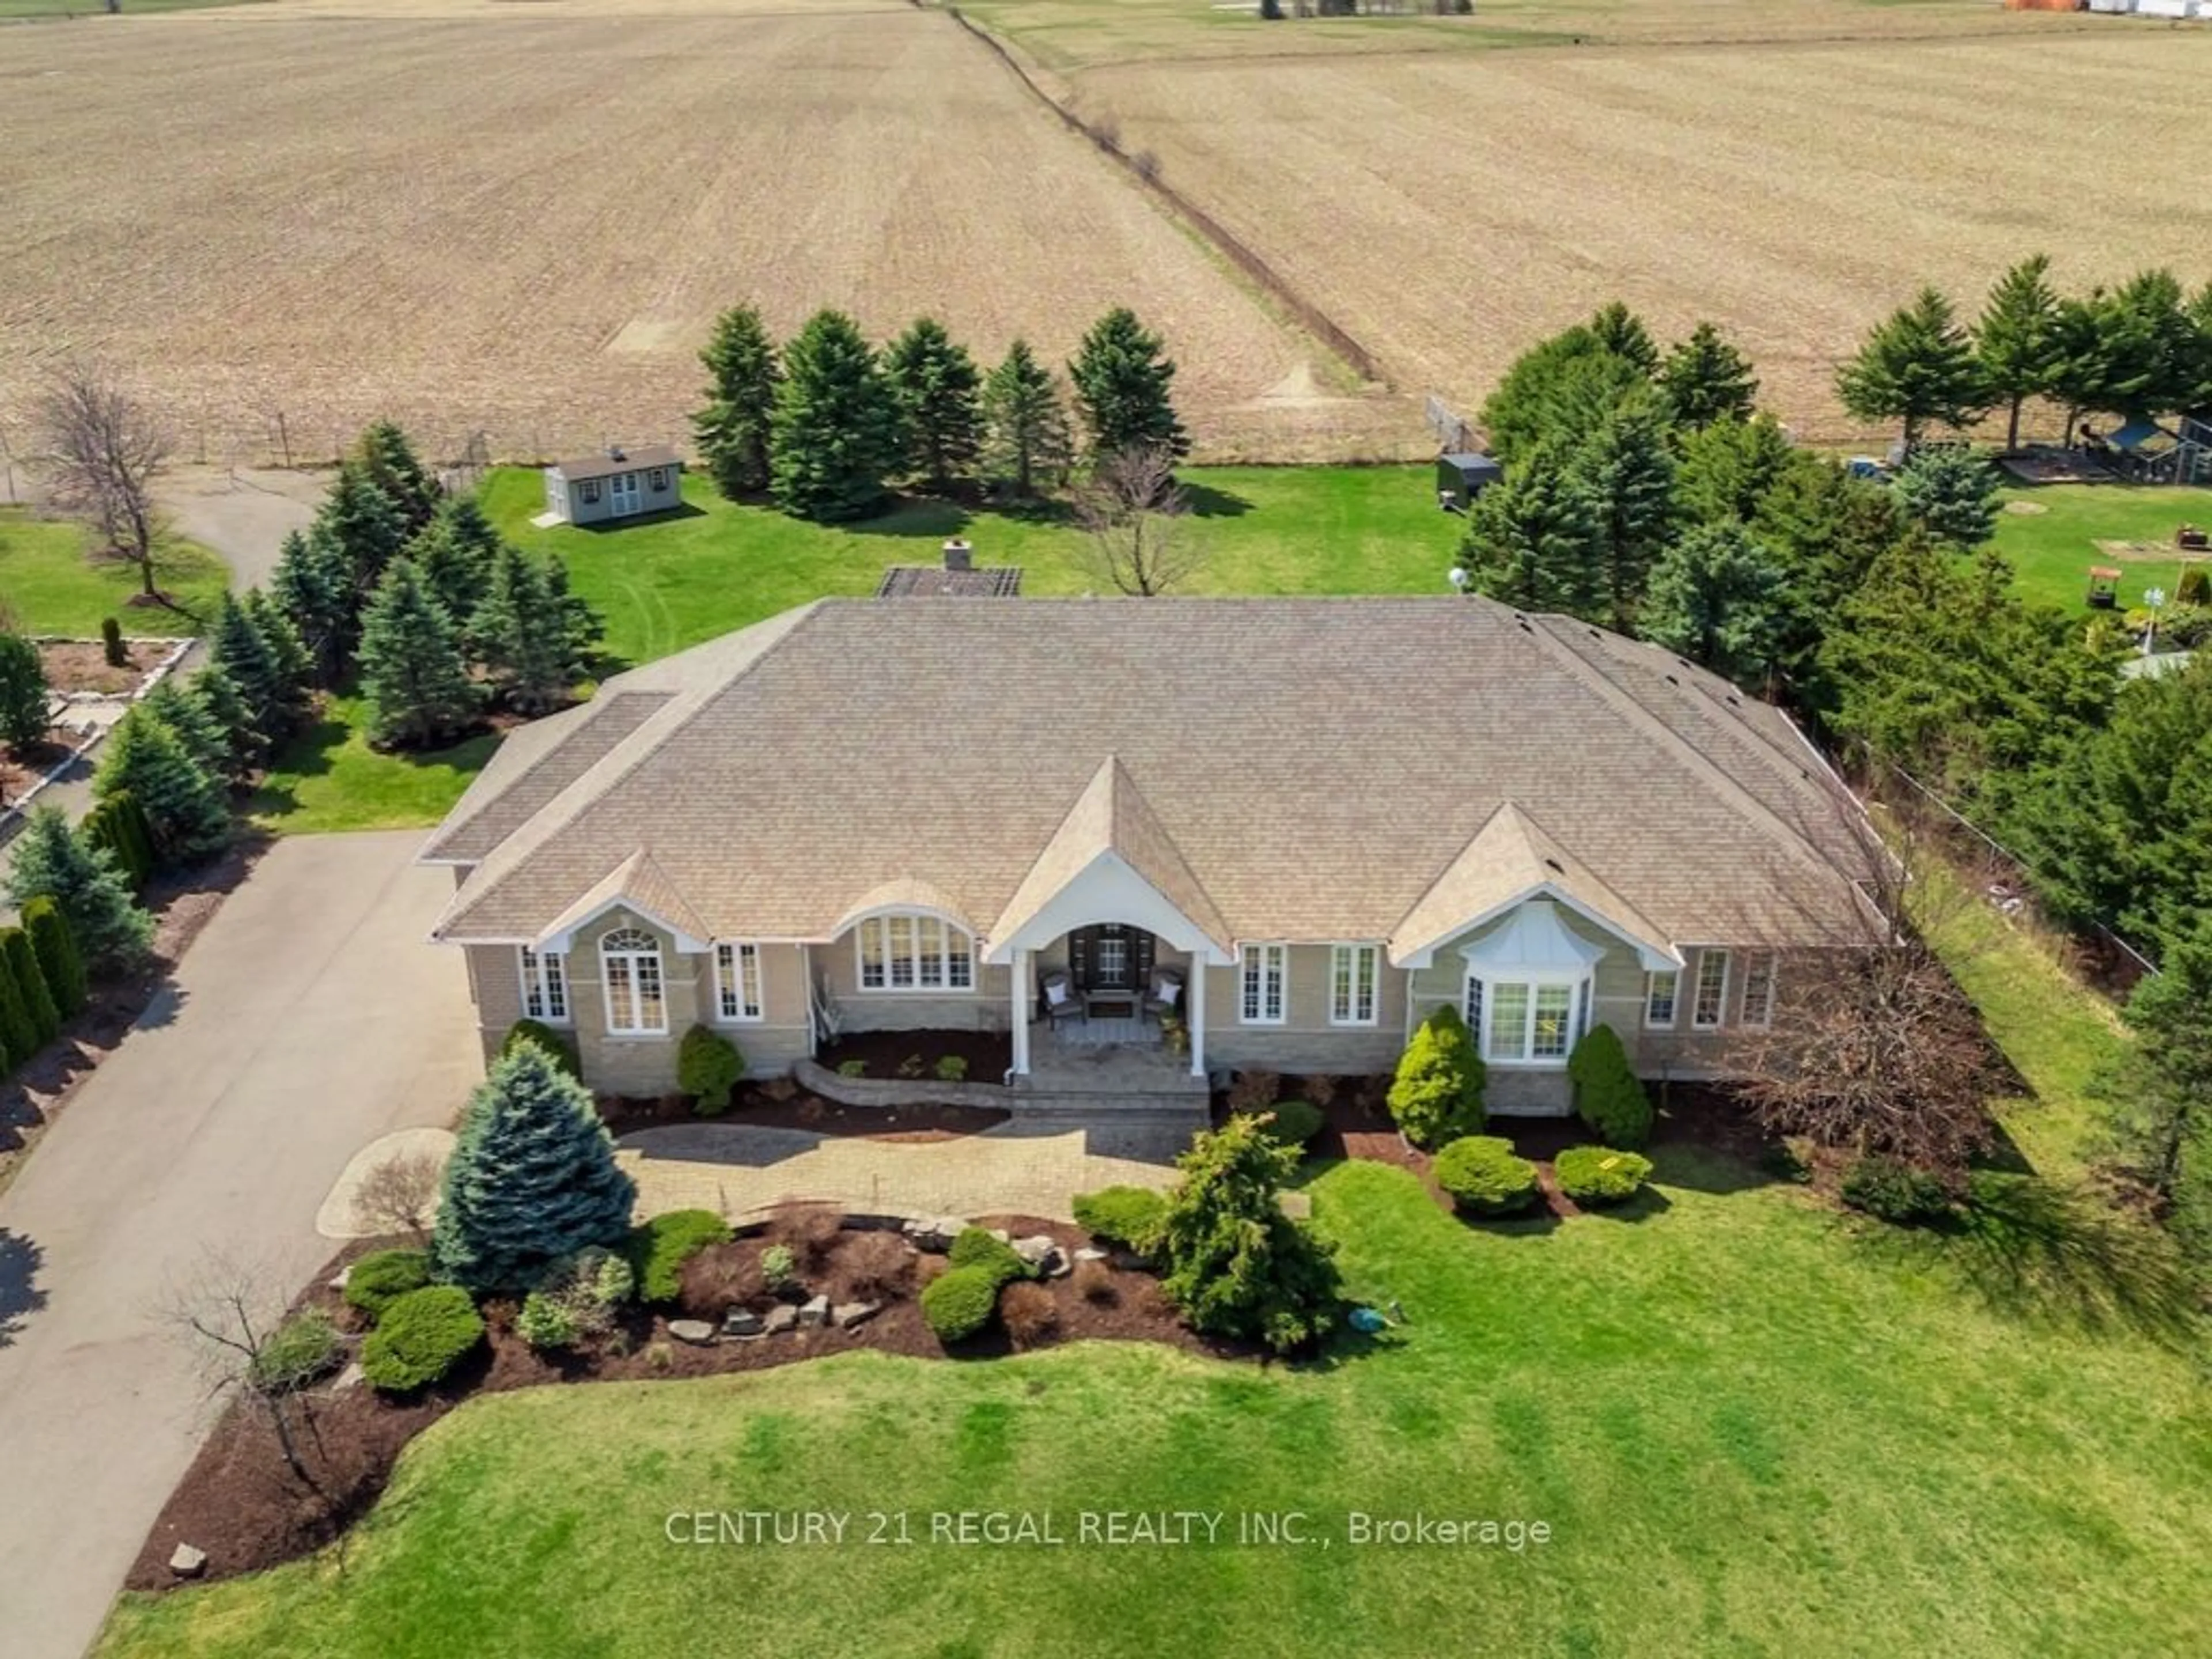 Frontside or backside of a home for 14586 Kennedy Rd, Caledon Ontario L7C 2G4